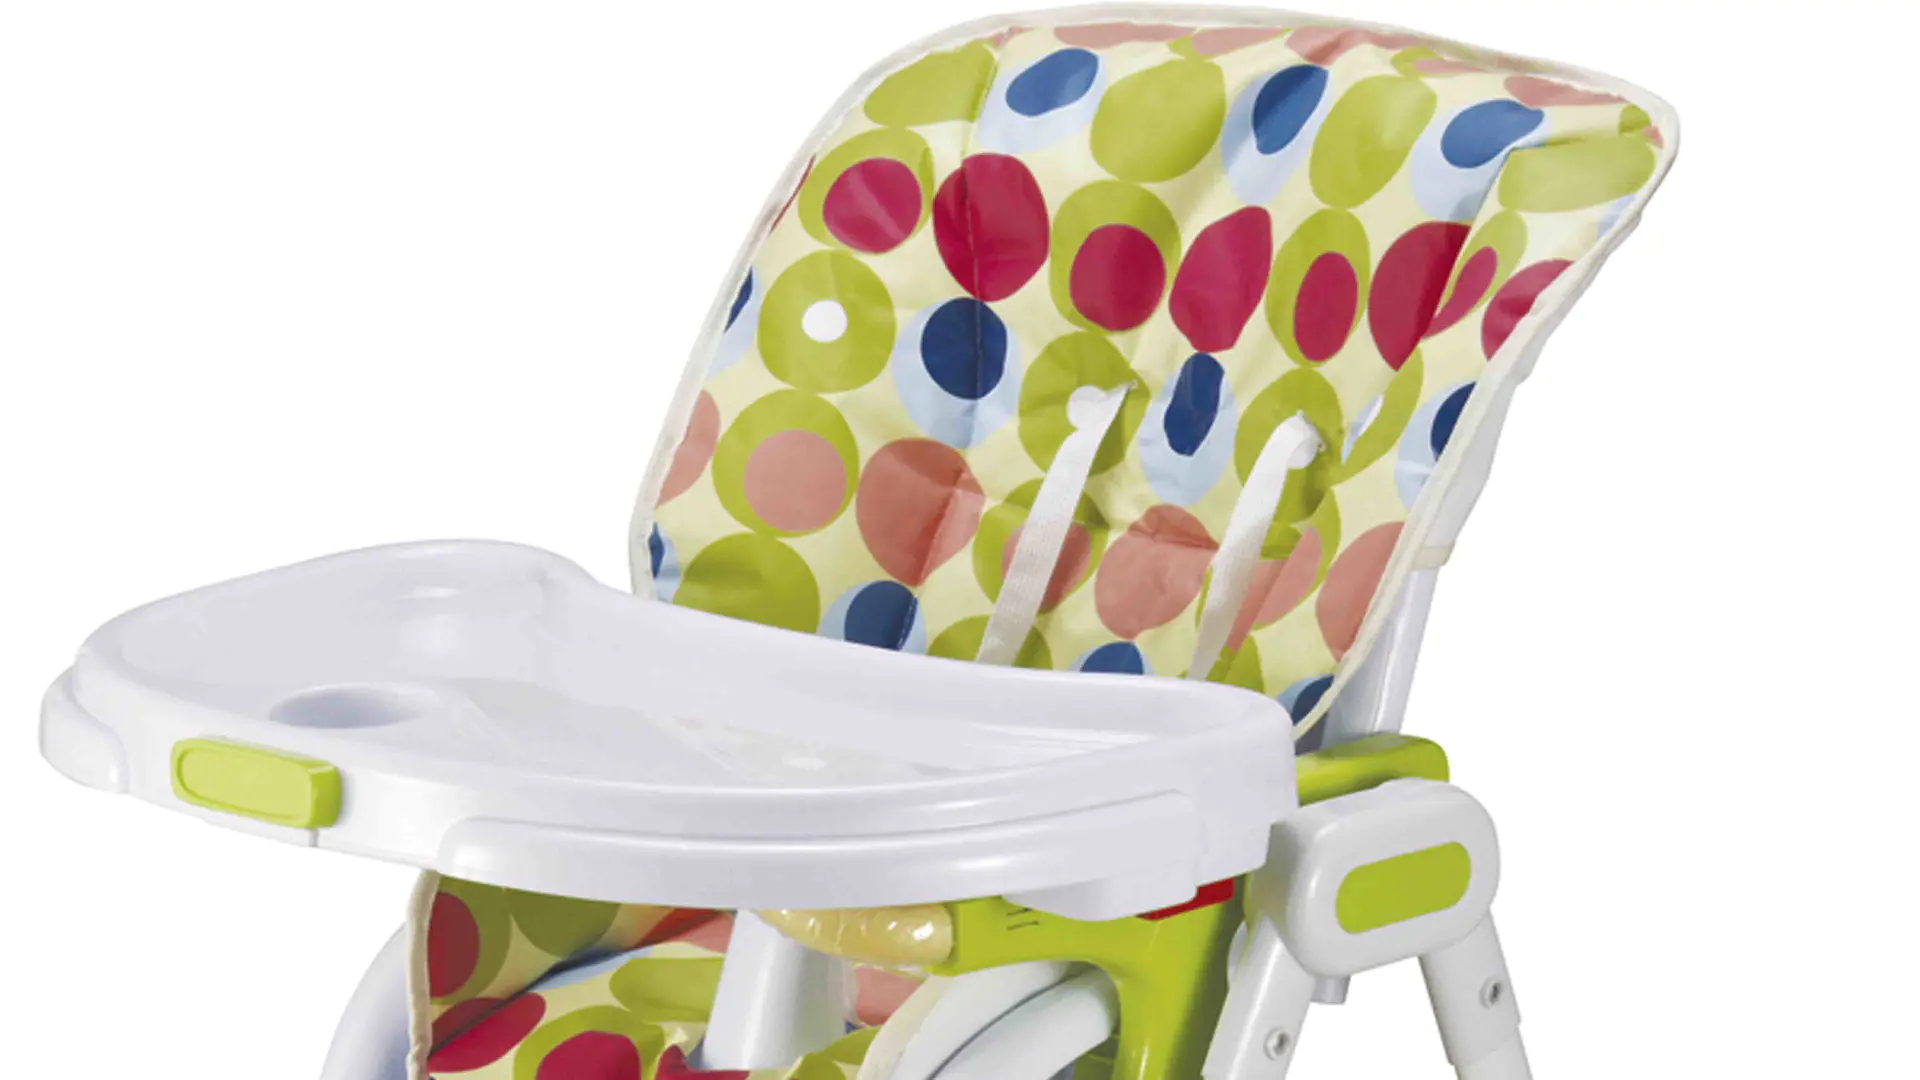 Aoqi plastic baby high chair with wheels series for home